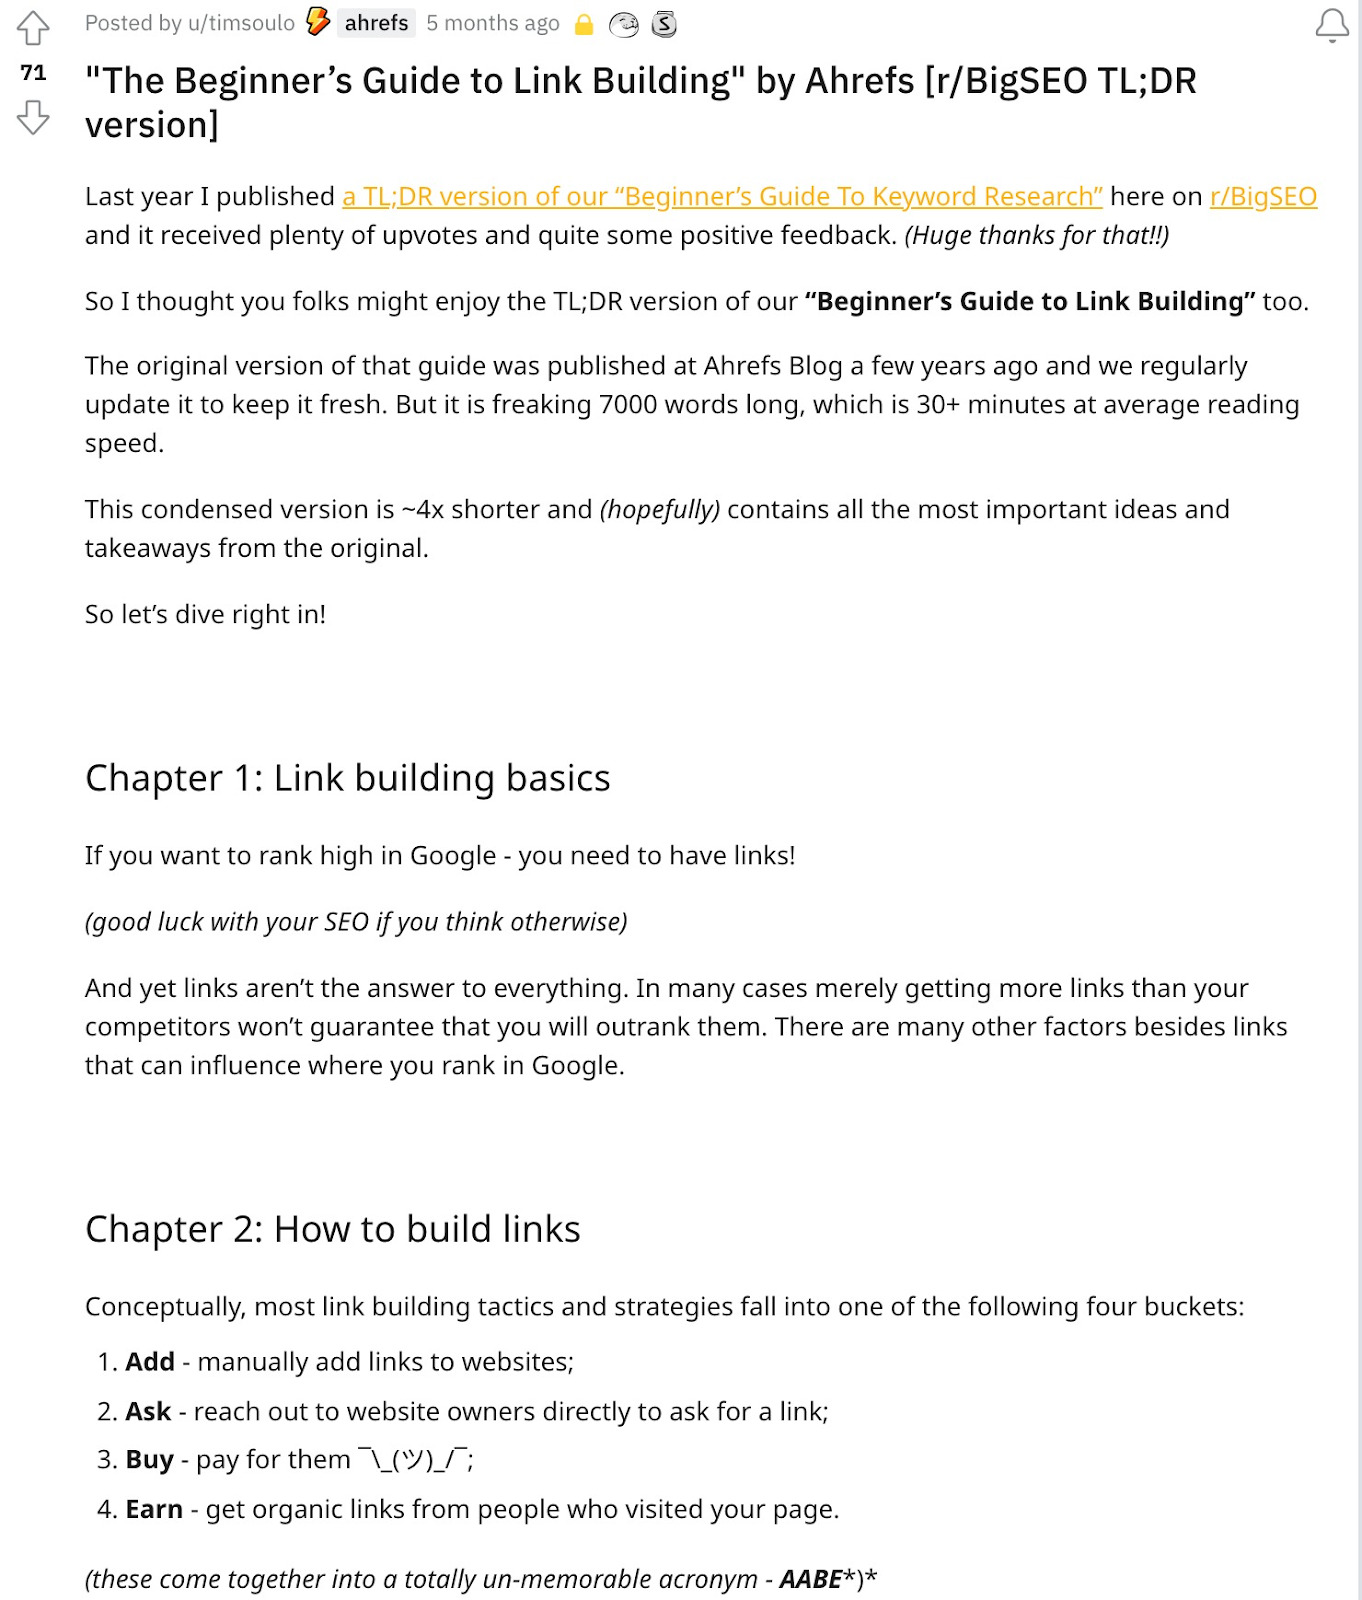 Tim's Reddit post on Ahrefs' guide to link building 